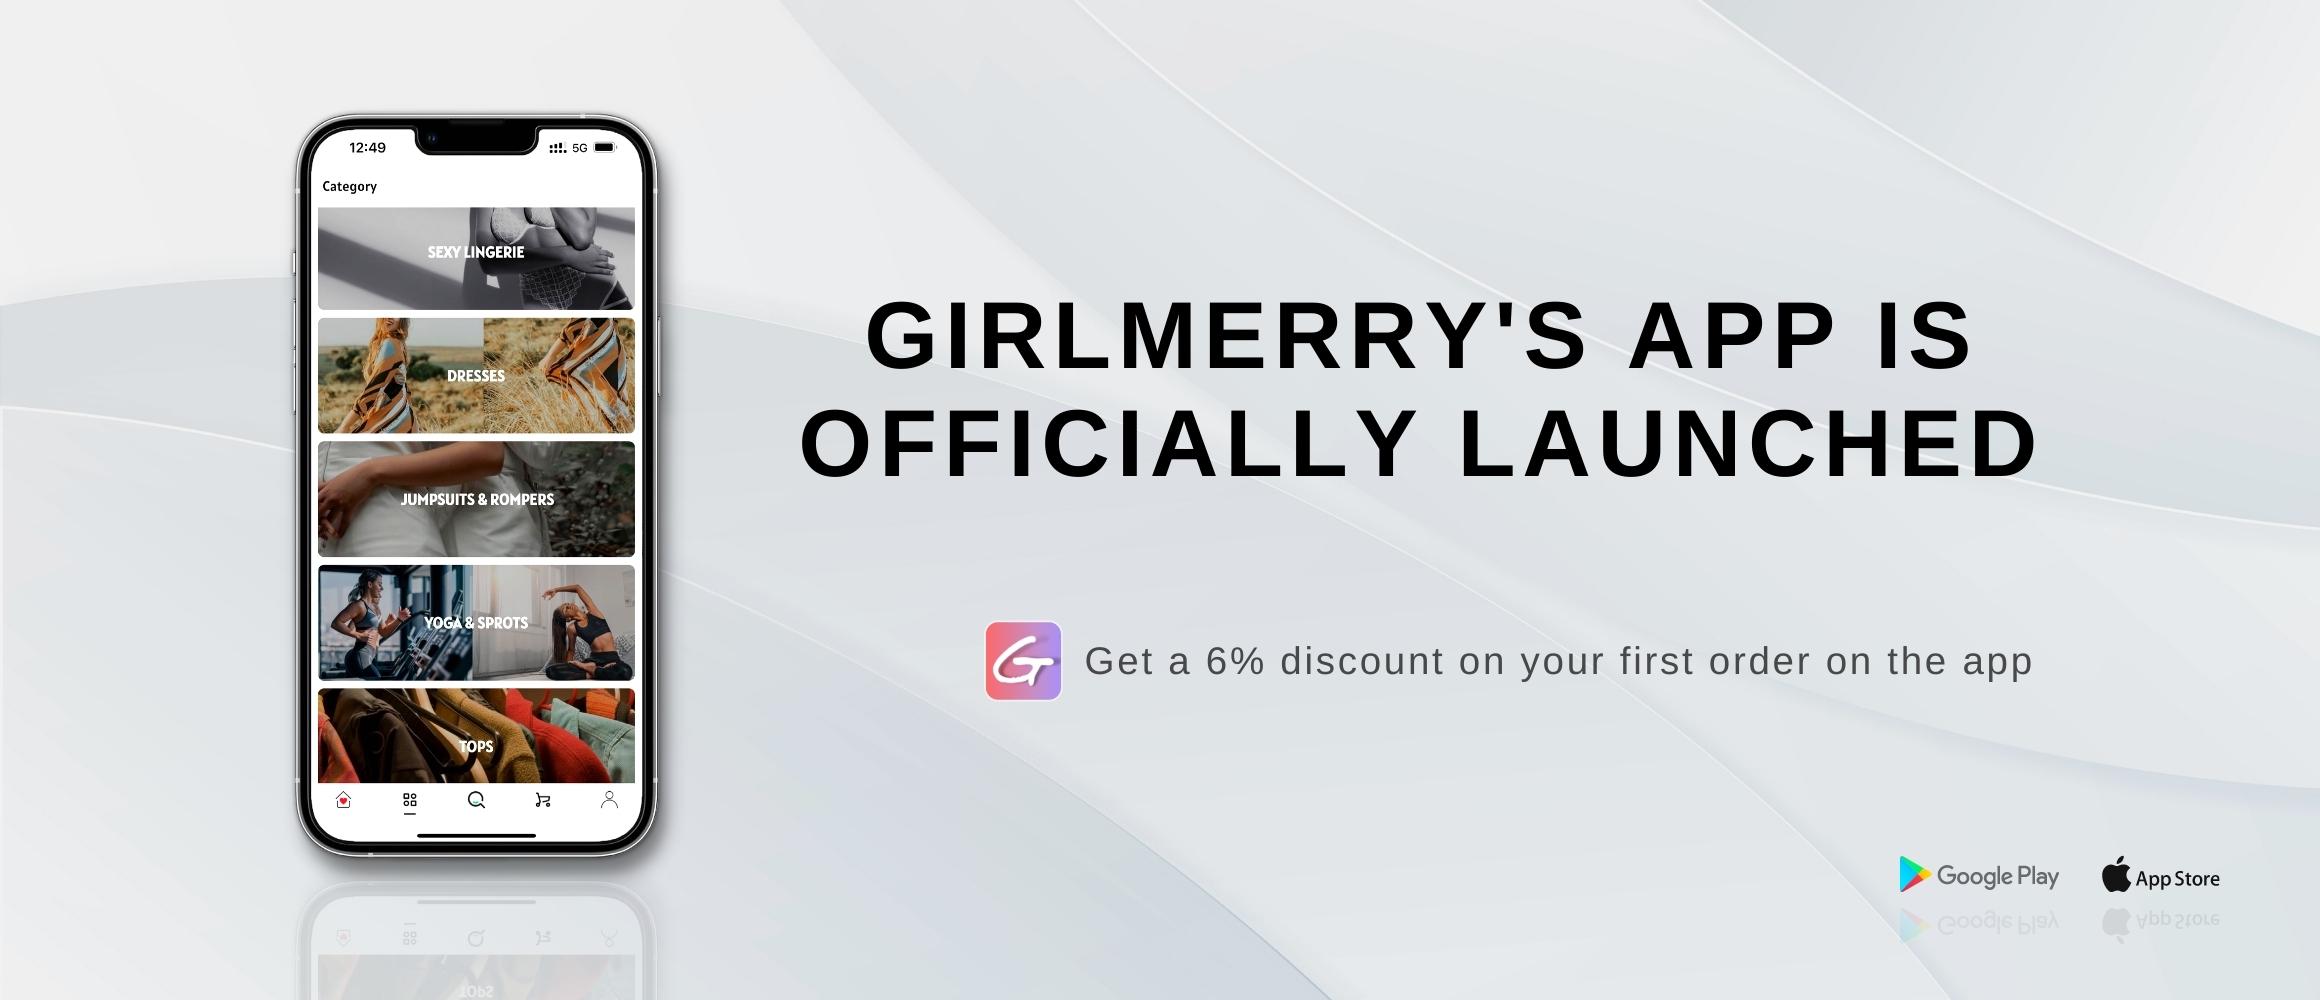 Girlmerry App is officially launched